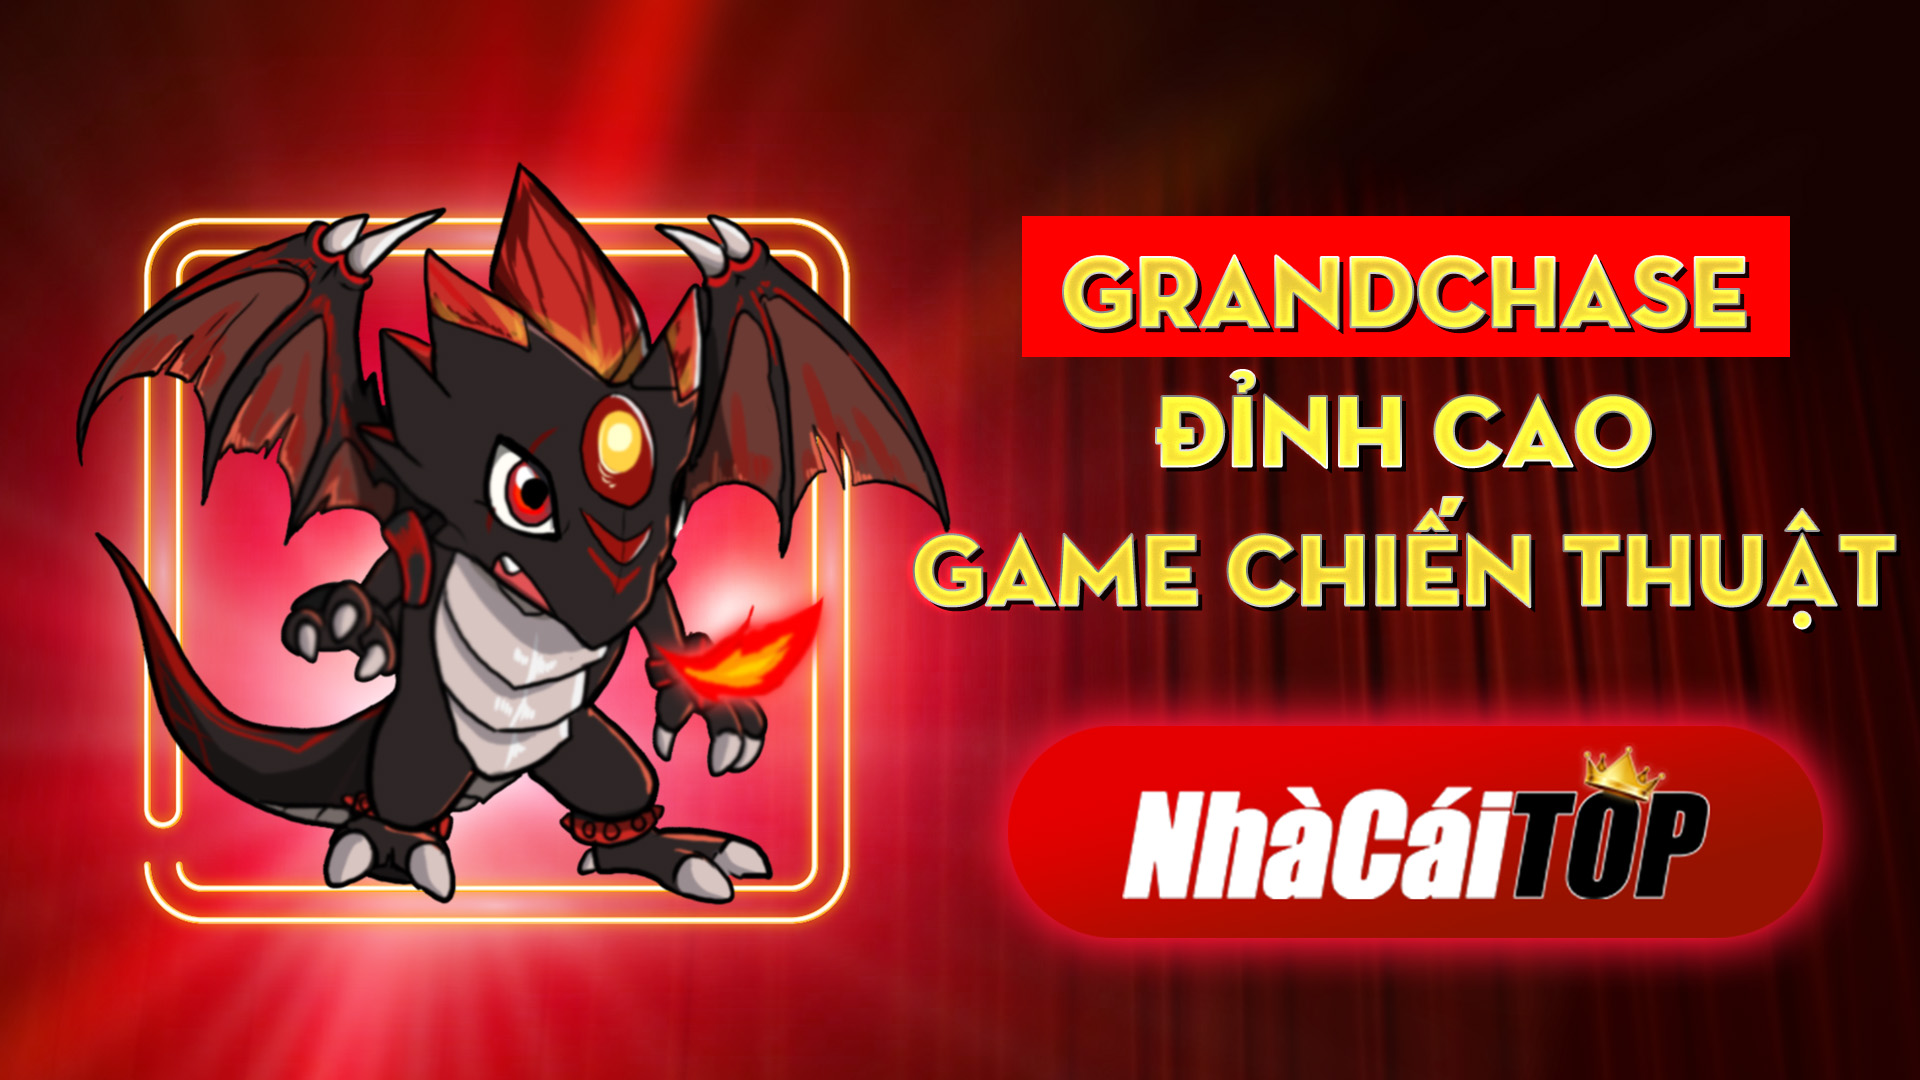 332 Grandchase – Djinh Cao Game Chien Thuat